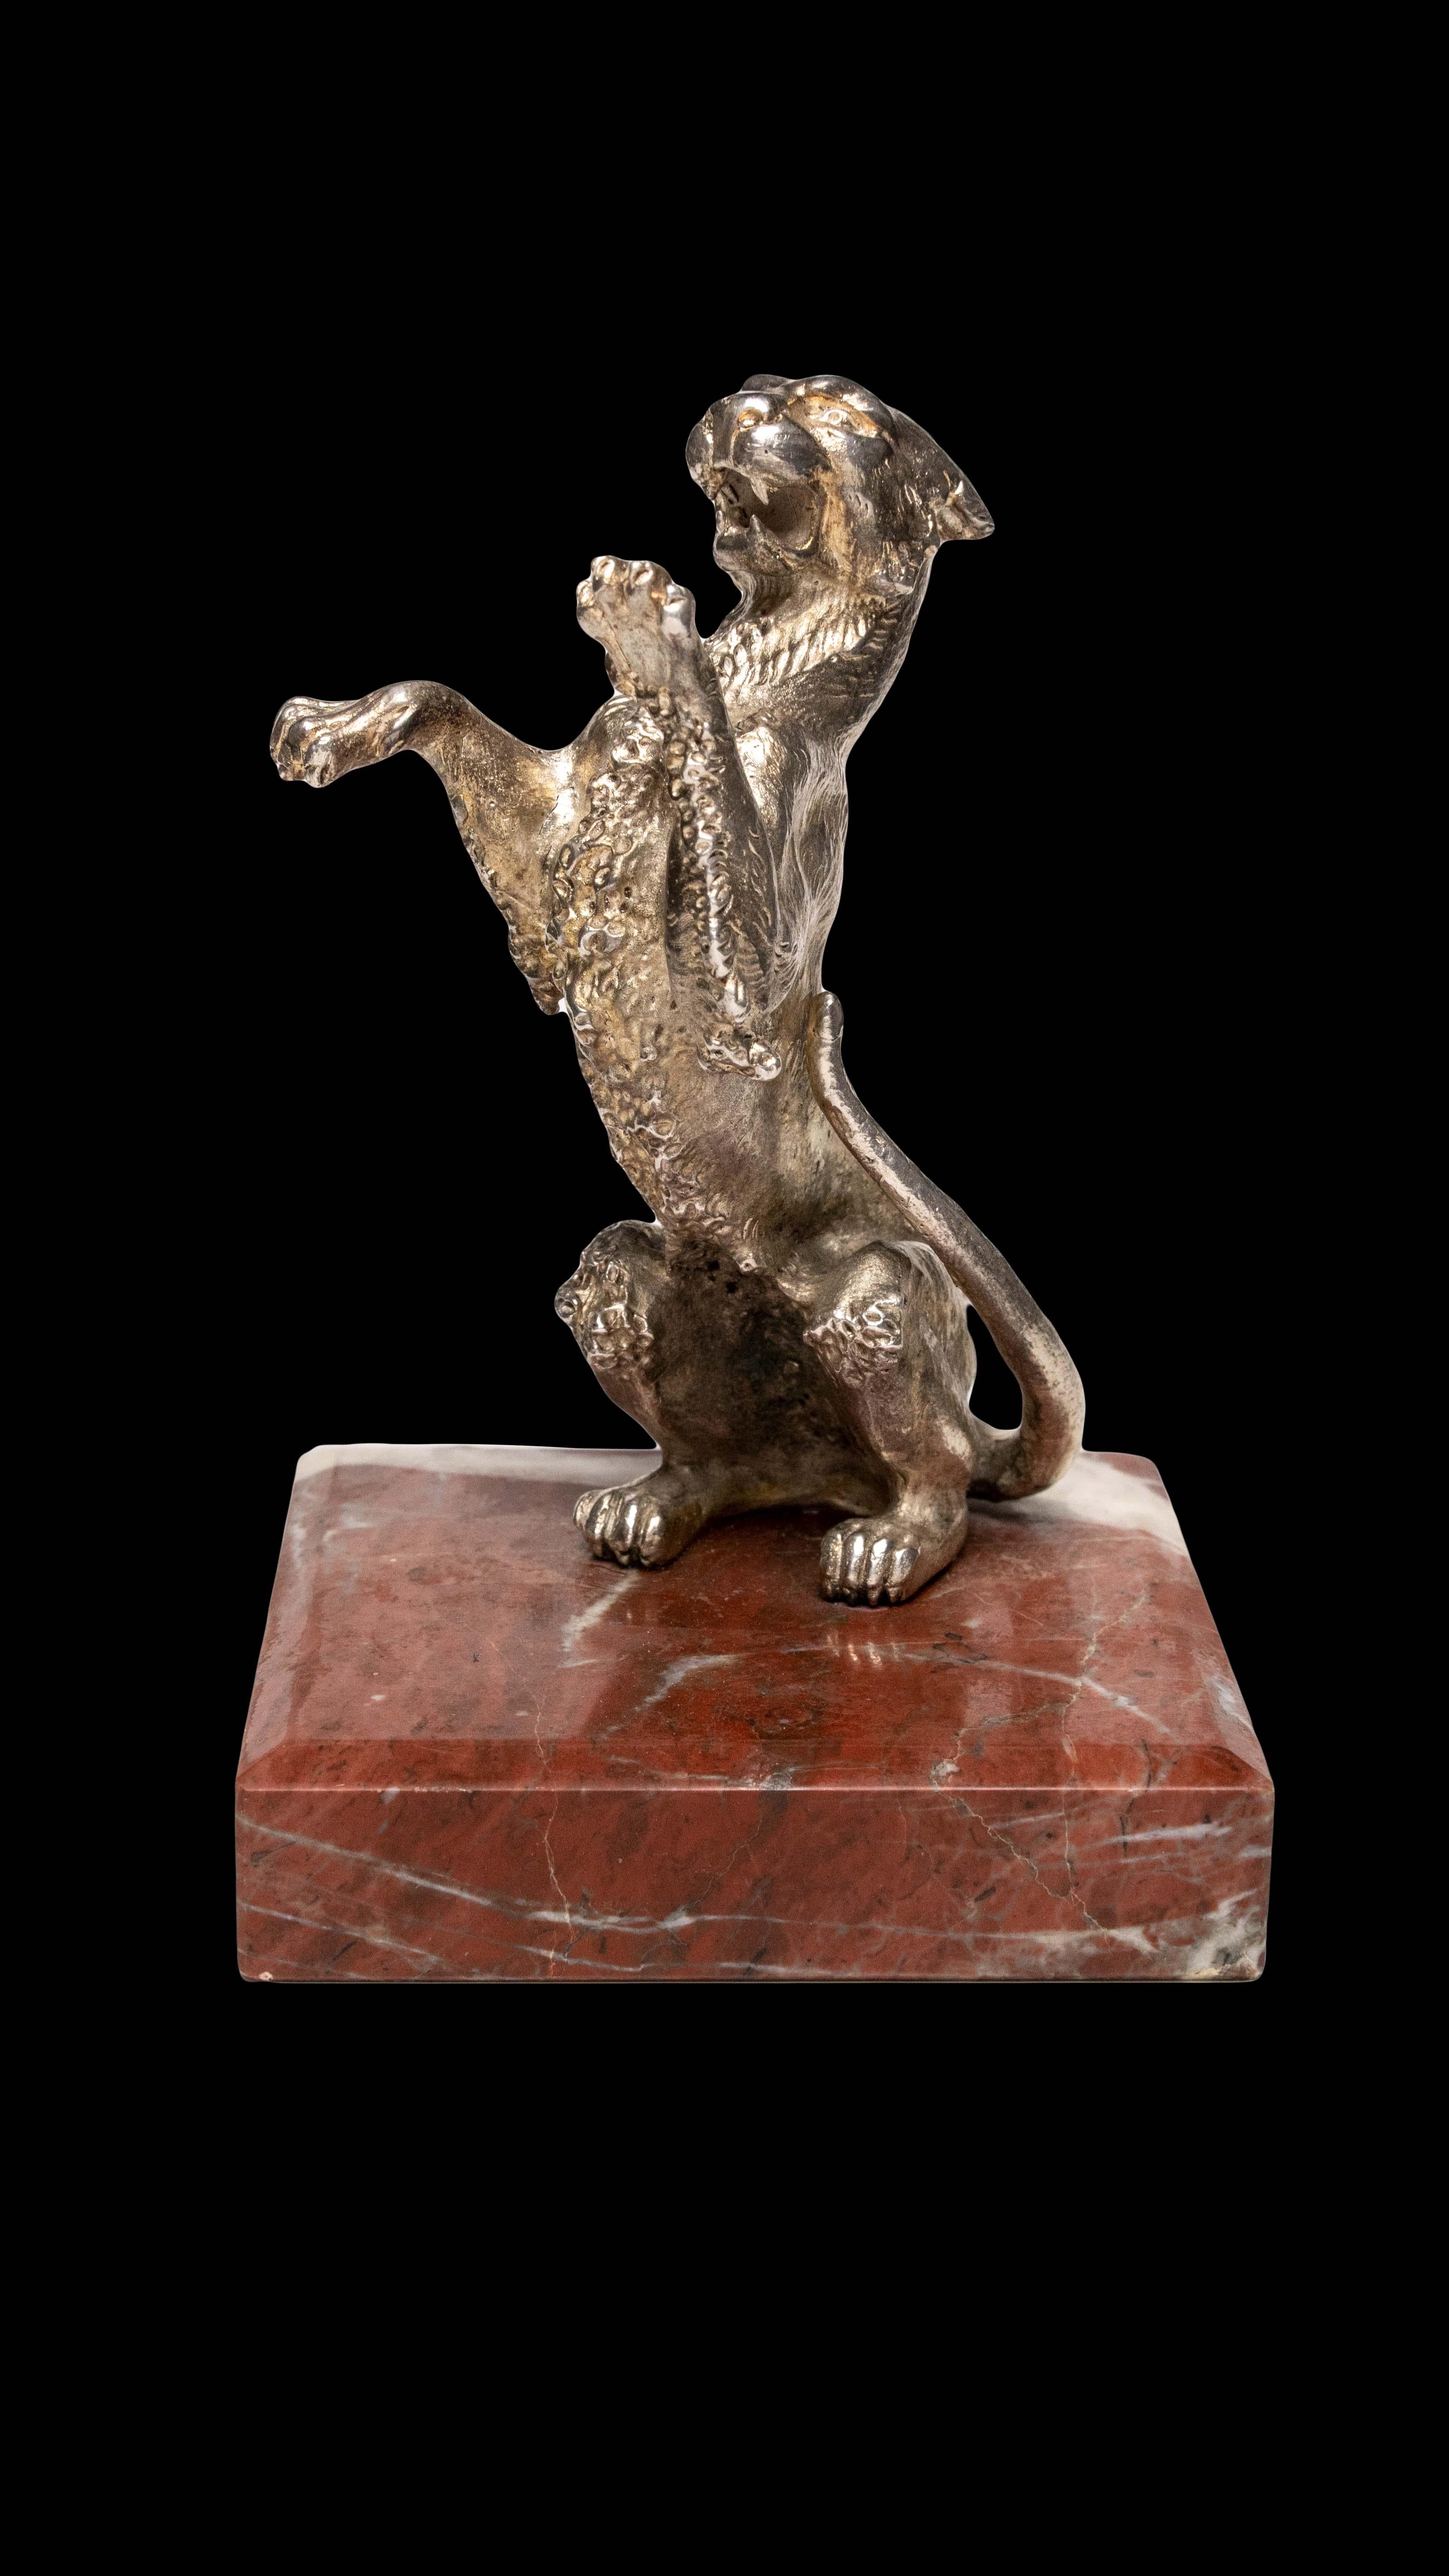 Car radiator ornament or Mascot of a Lioness. Stamped Odiot

Measures: 3.5